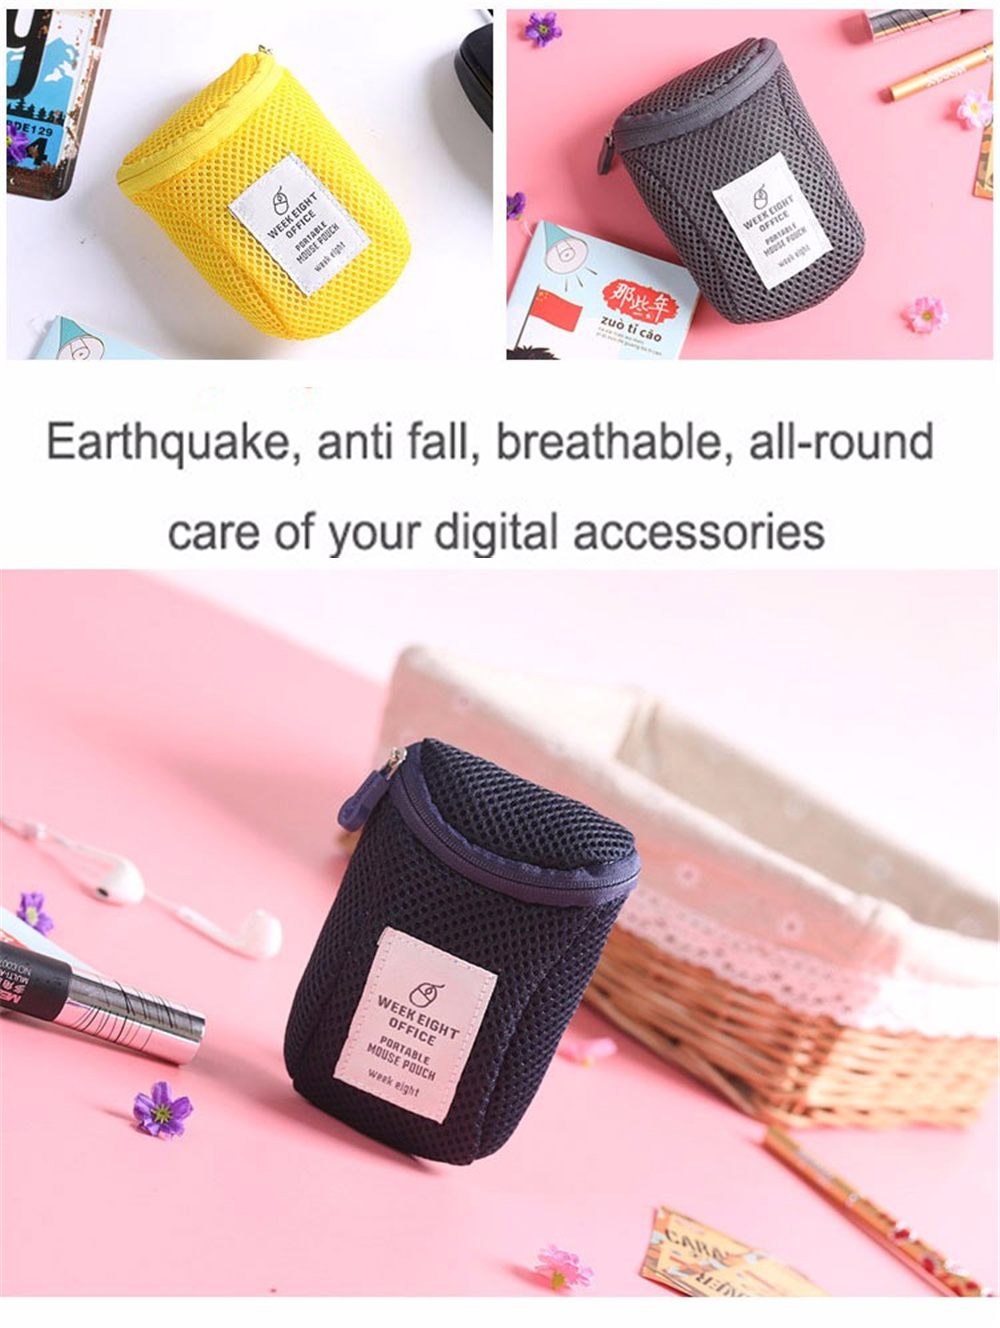 Organizer System Kit Case Portable Storage Bag Digital Gadget Devices USB Cable Earphone Pen Travel Cosmetic Insert